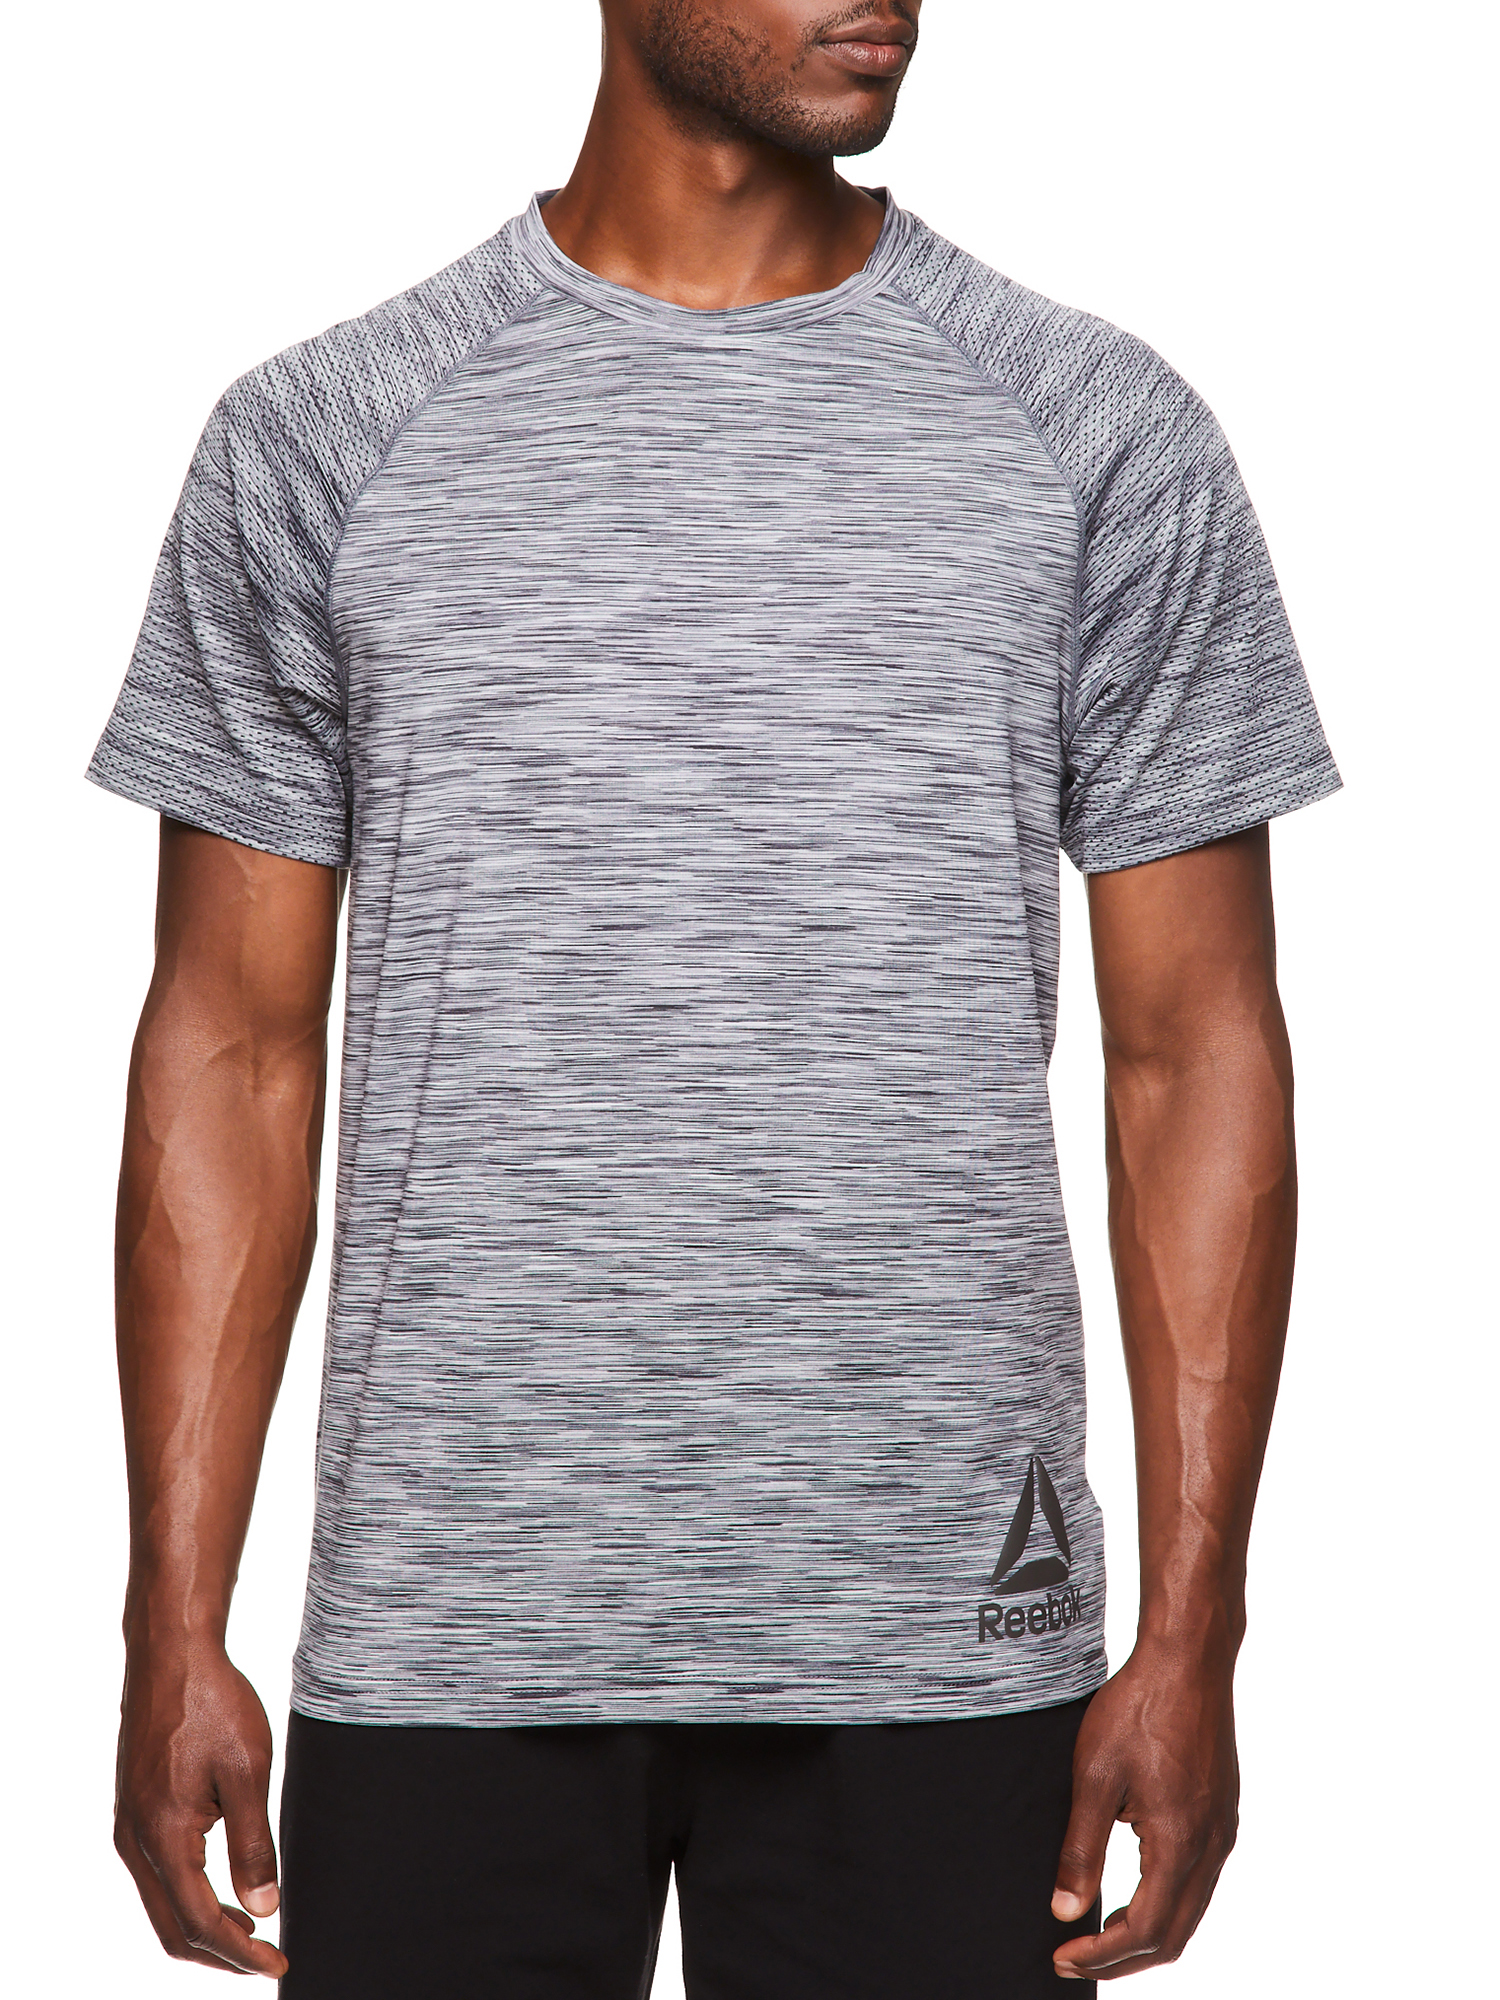 Reebok Men's and Big Men's Active Short Sleeve Tee with Mesh Sleeves, up to Size 3XL - image 1 of 4